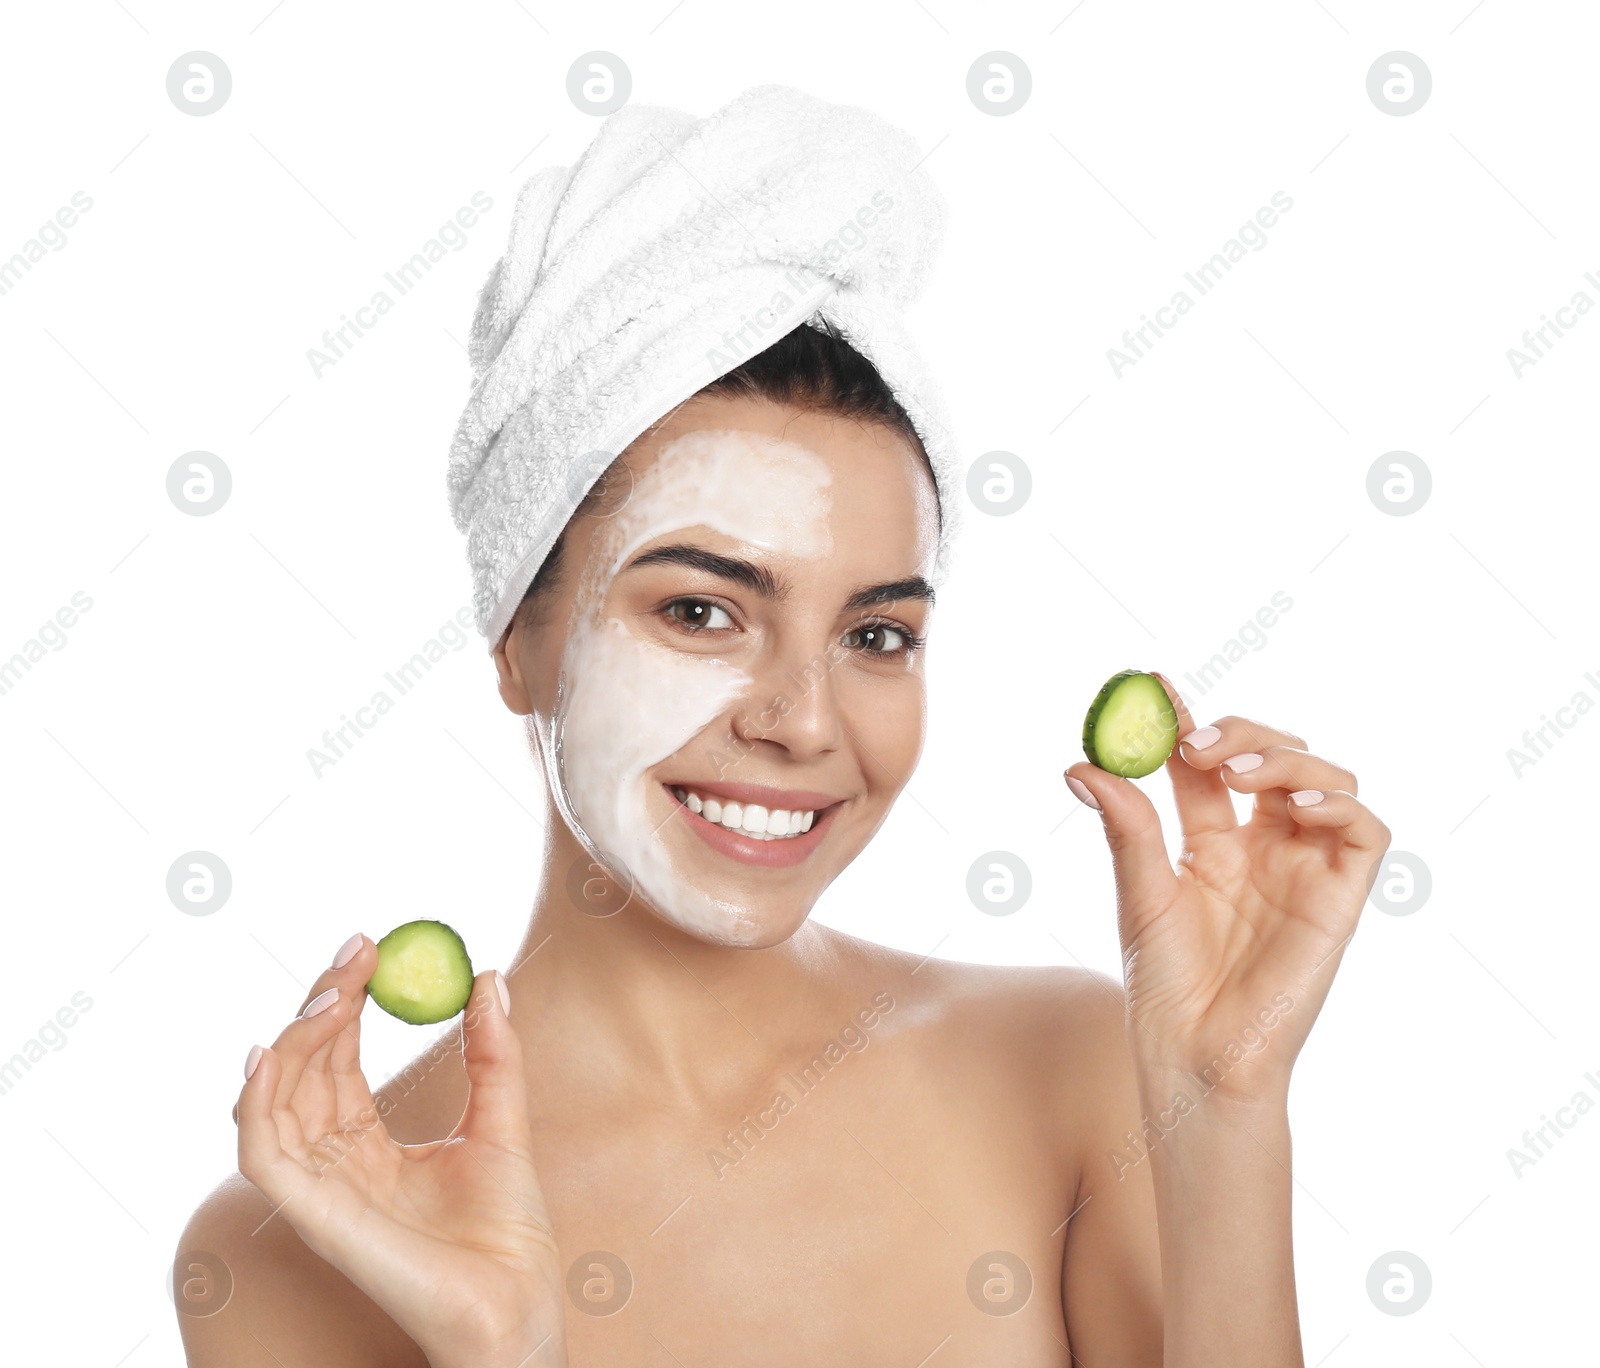 Photo of Happy young woman with organic mask on her face holding cucumber slices against white background